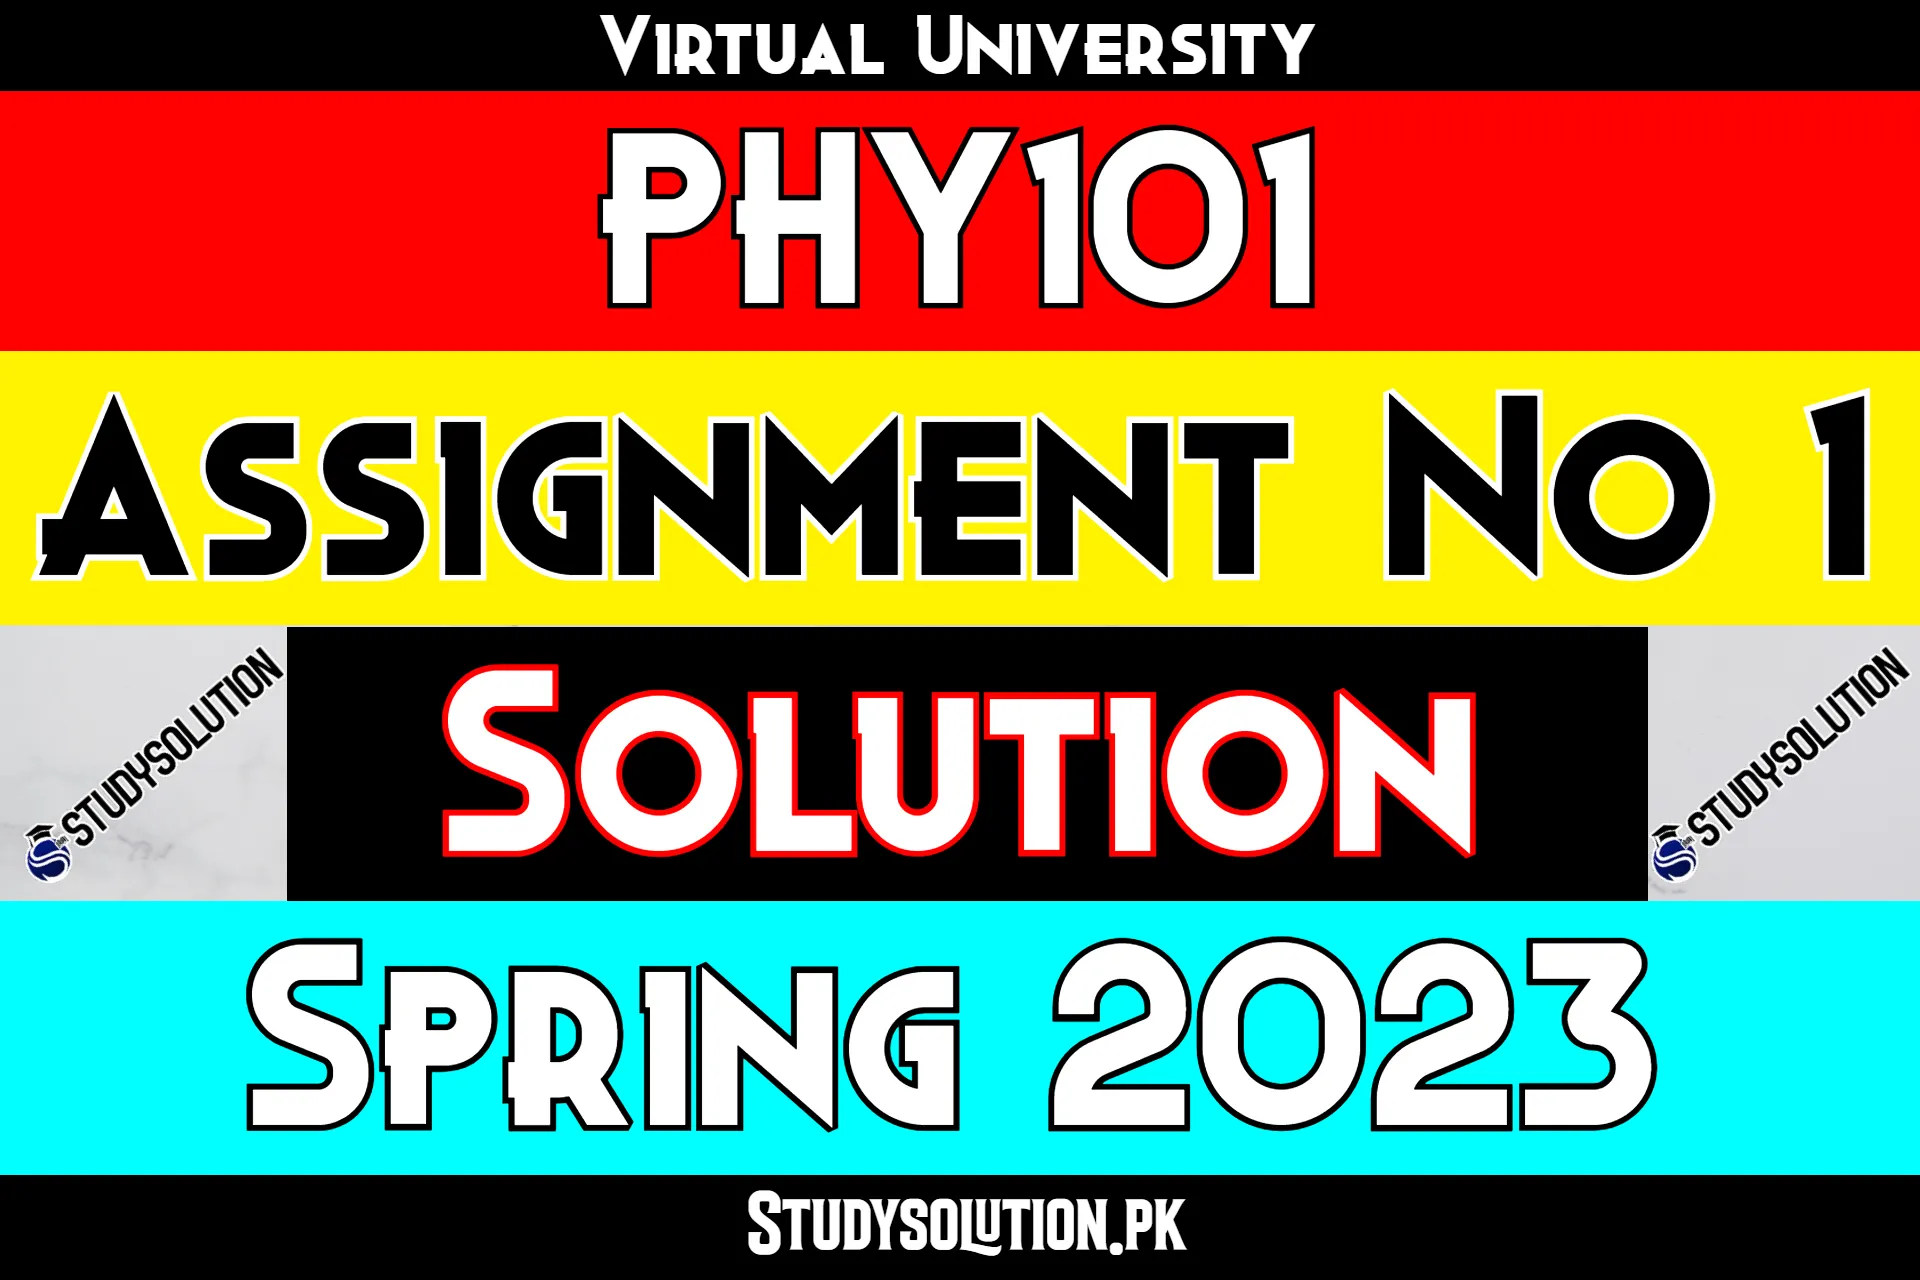 PHY101 Assignment No 1 Solution Spring 2023